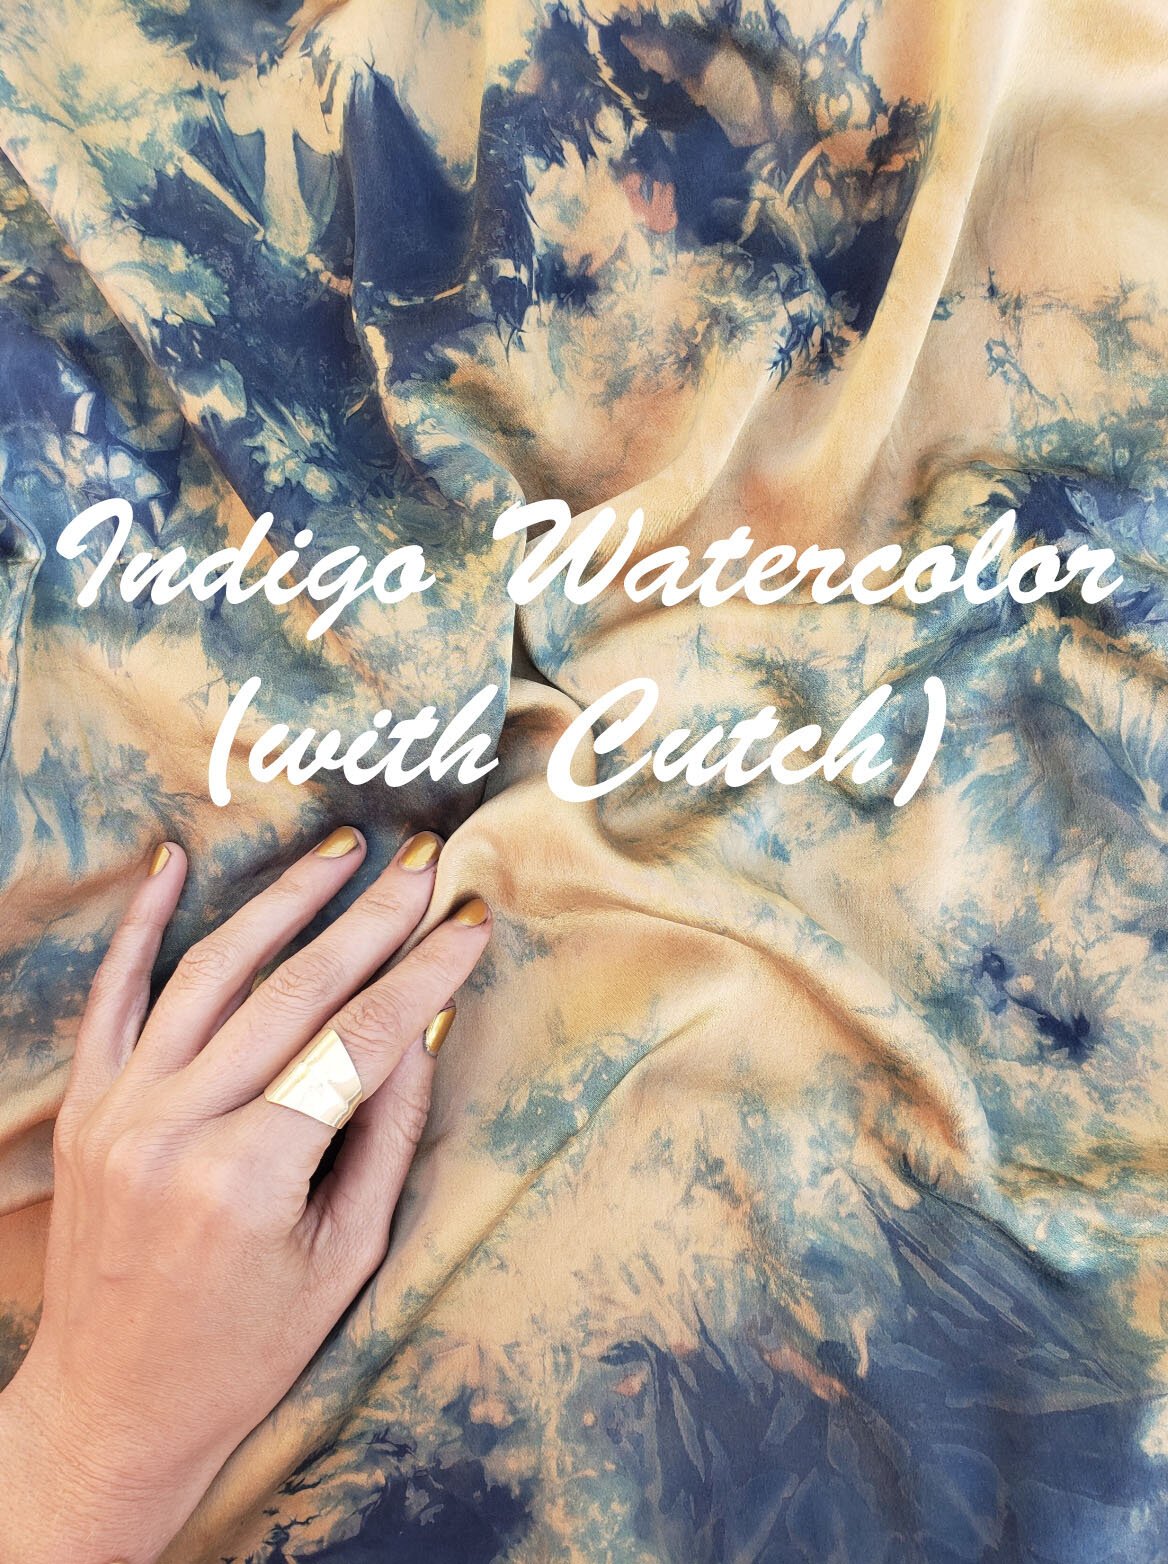 IndigoWatercolor(with+cutch).jpeg